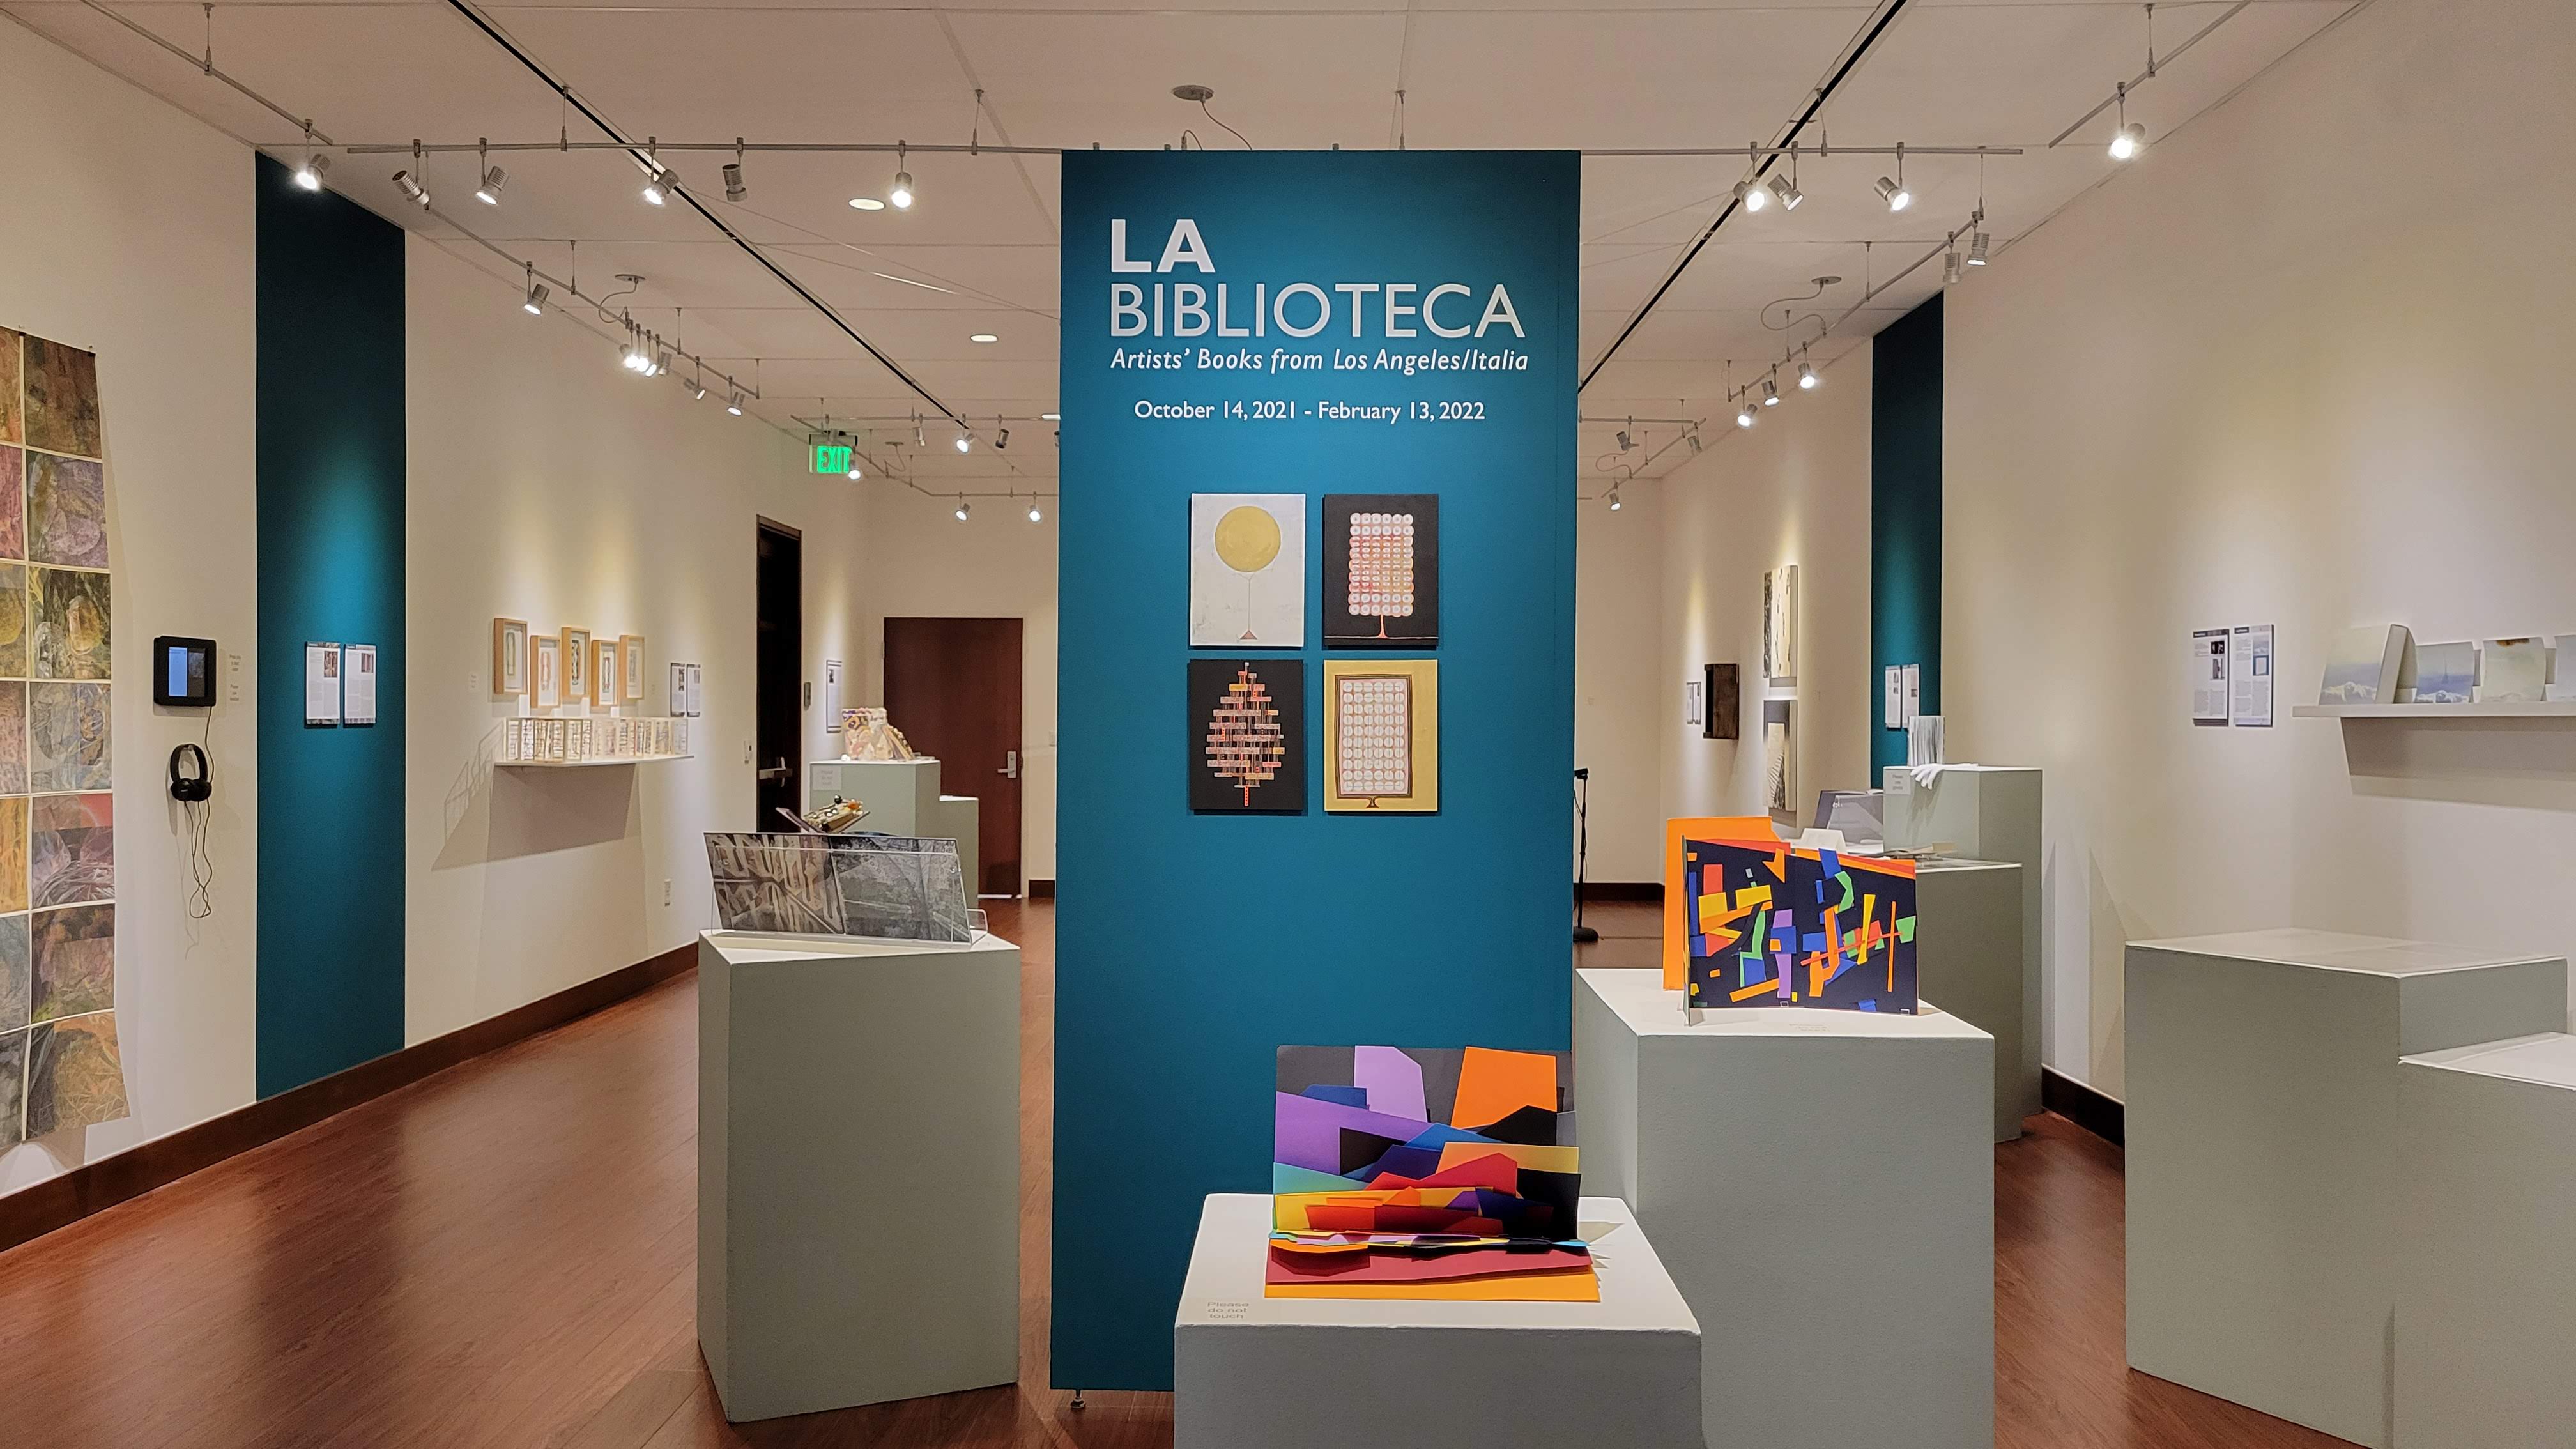 Installation View, Entrance of Gallery, LA Biblioteca: Artists' Books from Los Angeles/Italia, Oct. 14 to Feb. 13, 2021.